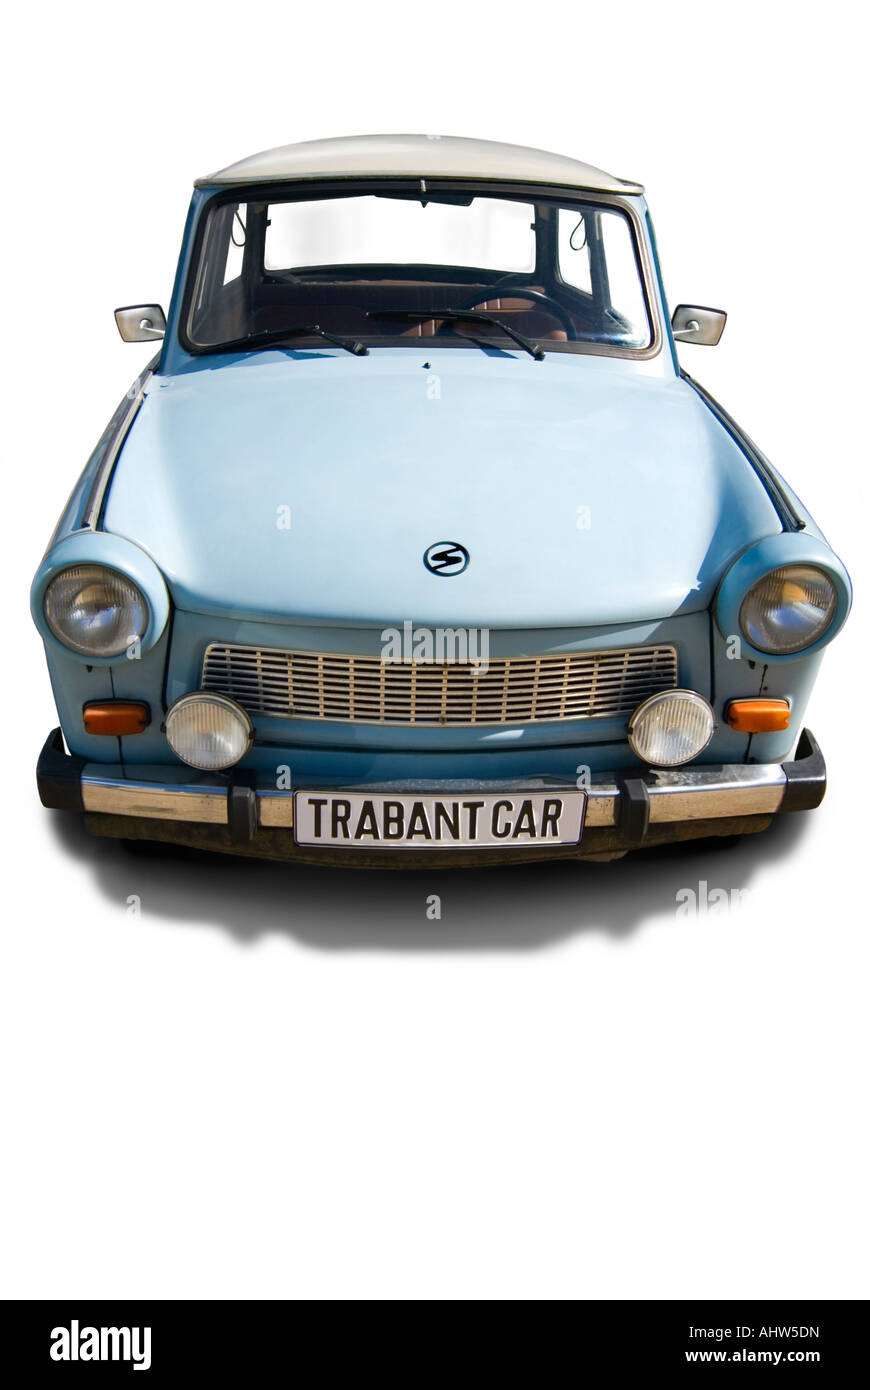 Vertical view of a vintage Trabant car, aka Trabbi or Trabi, on a white background. Stock Photo